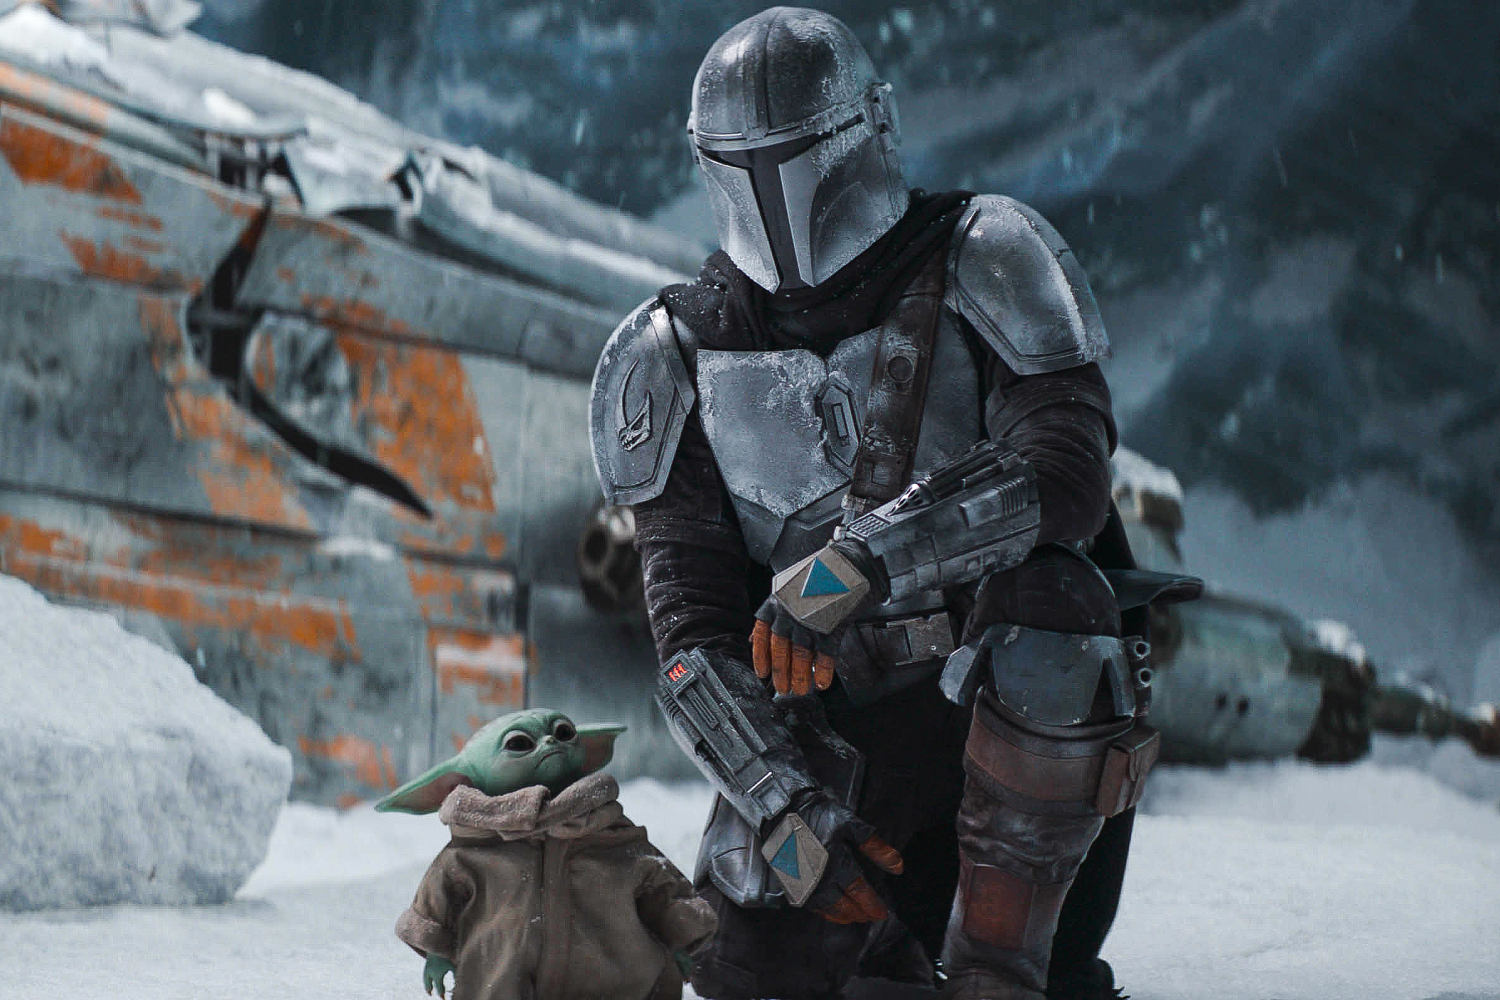 A new ‘Star Wars’ movie is coming to theaters: ‘The Mandalorian & Grogu’